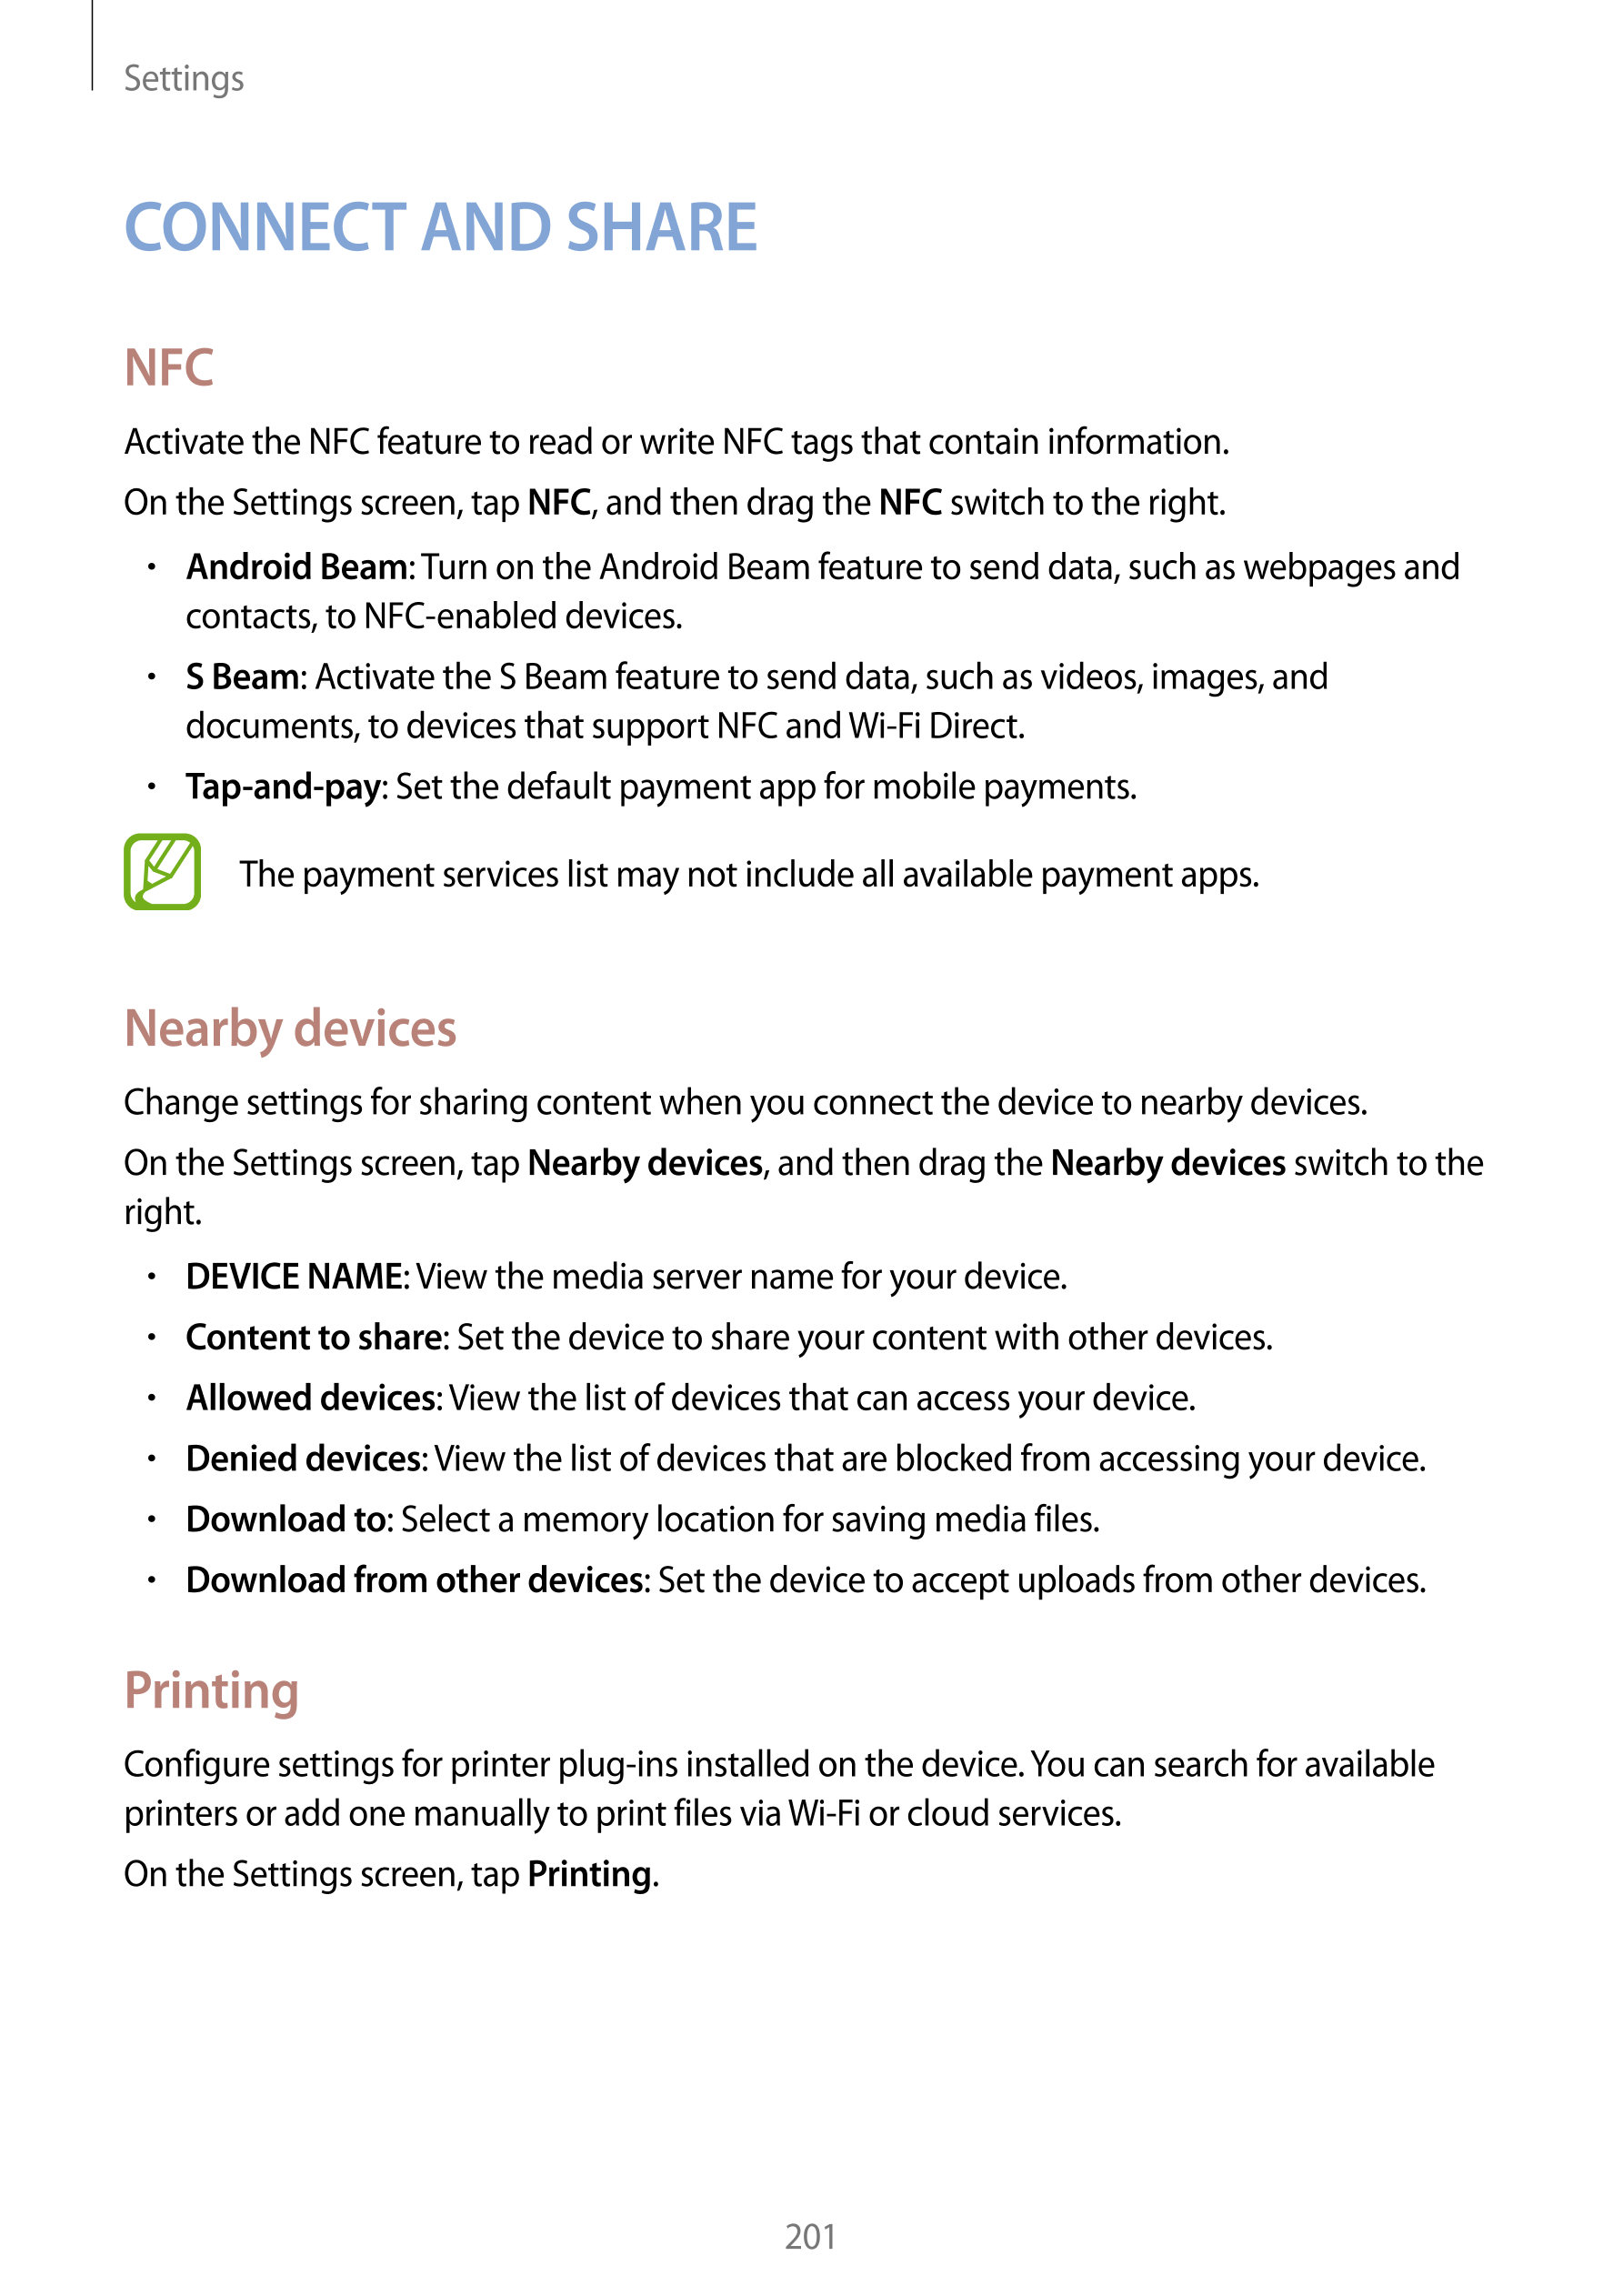 Settings
CONNECT AND SHARE
NFC
Activate the NFC feature to read or write NFC tags that contain information.
On the Settings scre